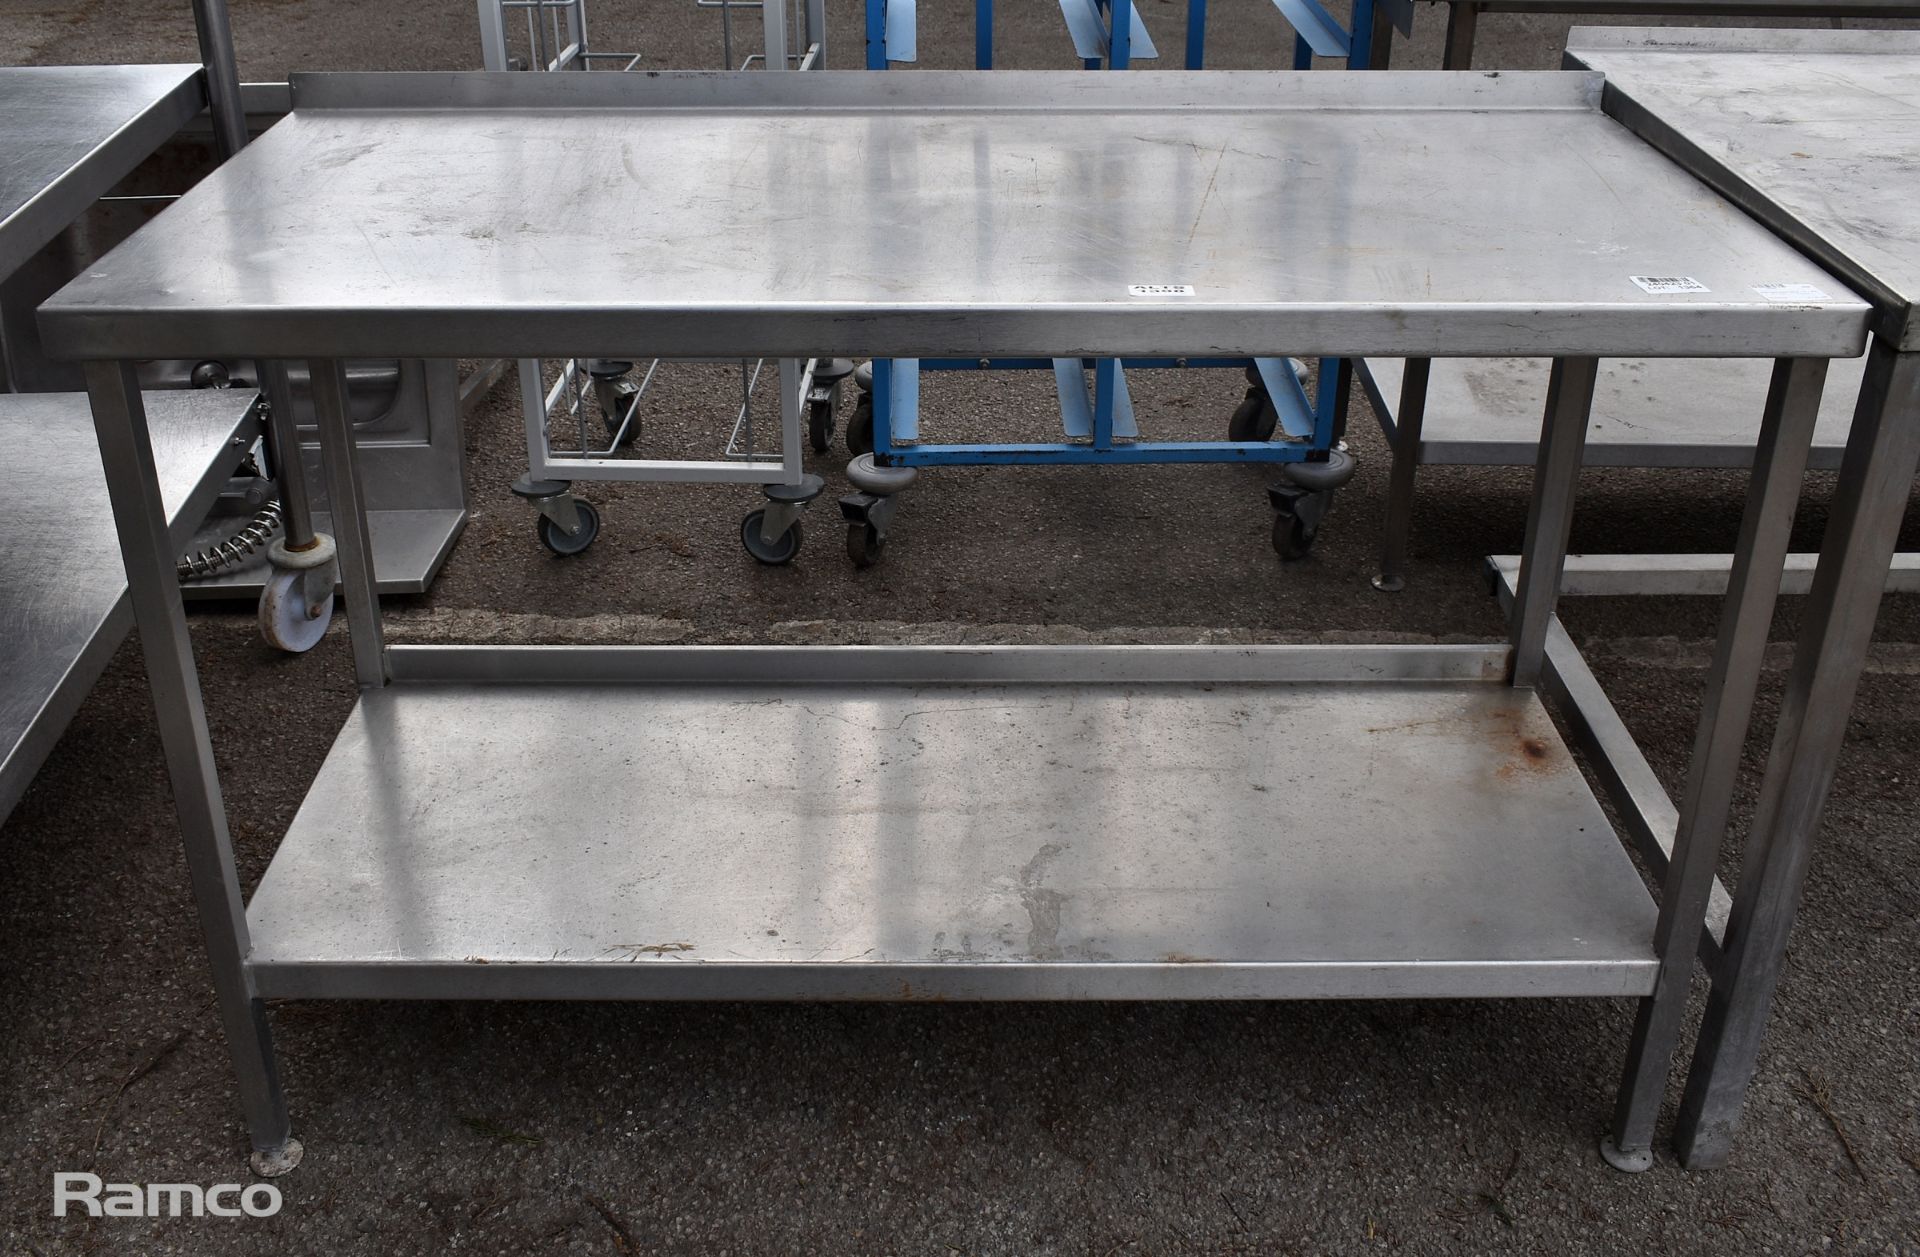 Stainless steel table - W 1400 x D 660 x H 900mm